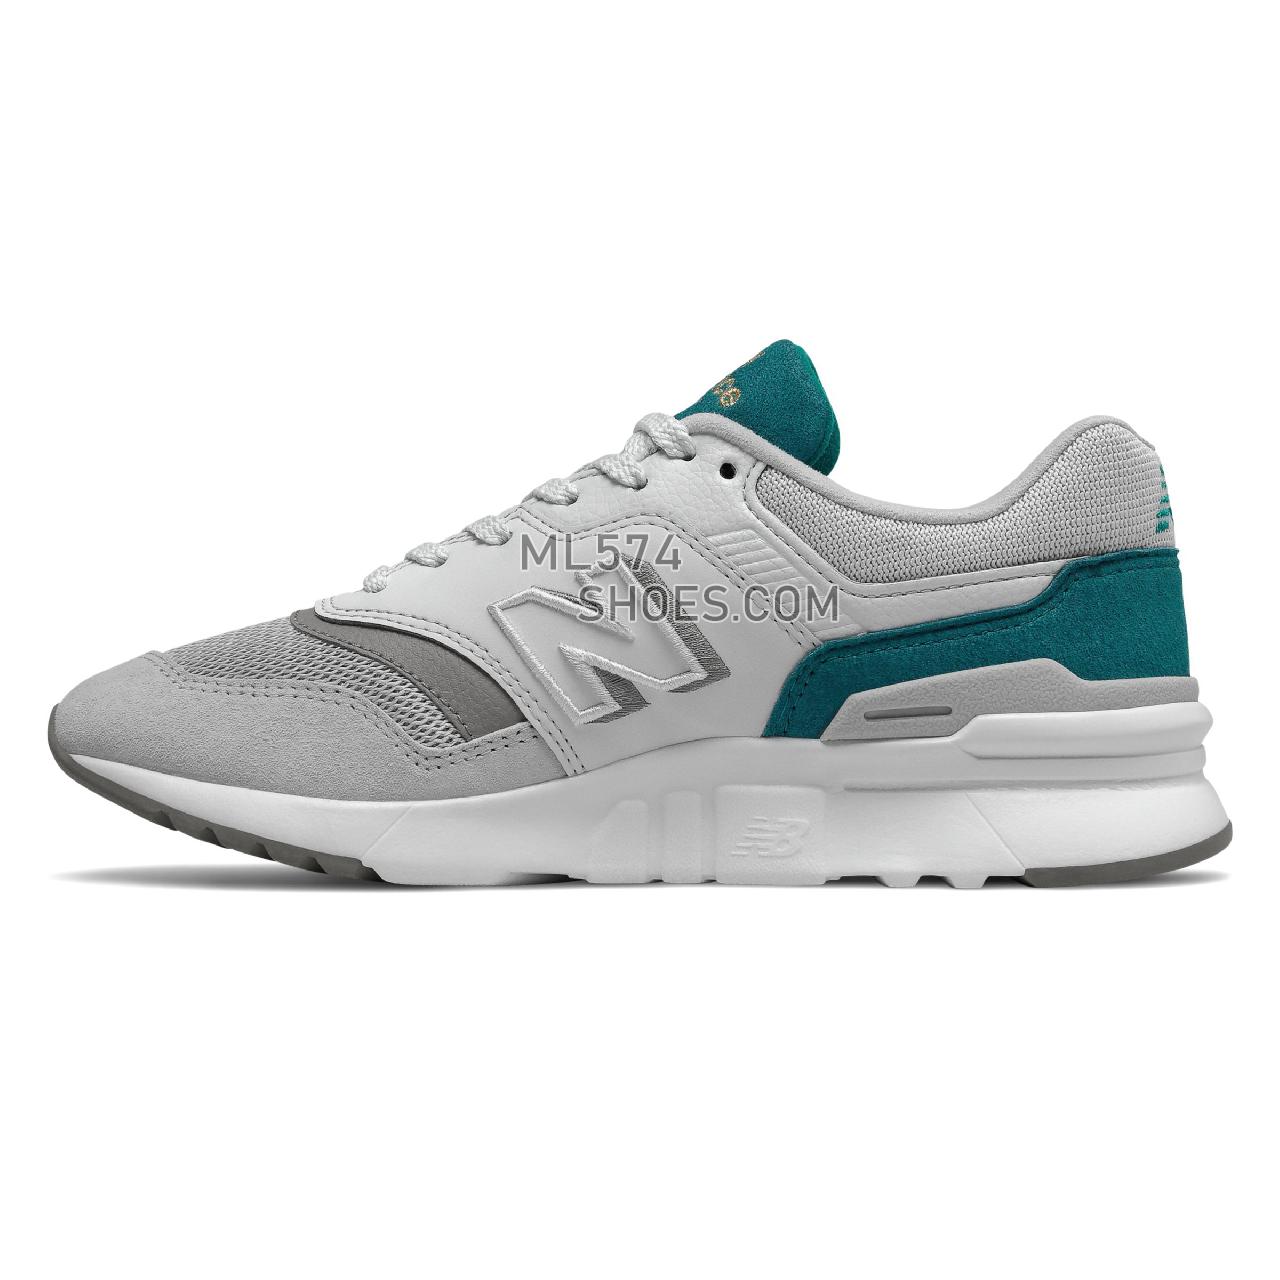 New Balance 997H - Women's 997H Classic - Rain Cloud with Team Teal and White - CW997HAN